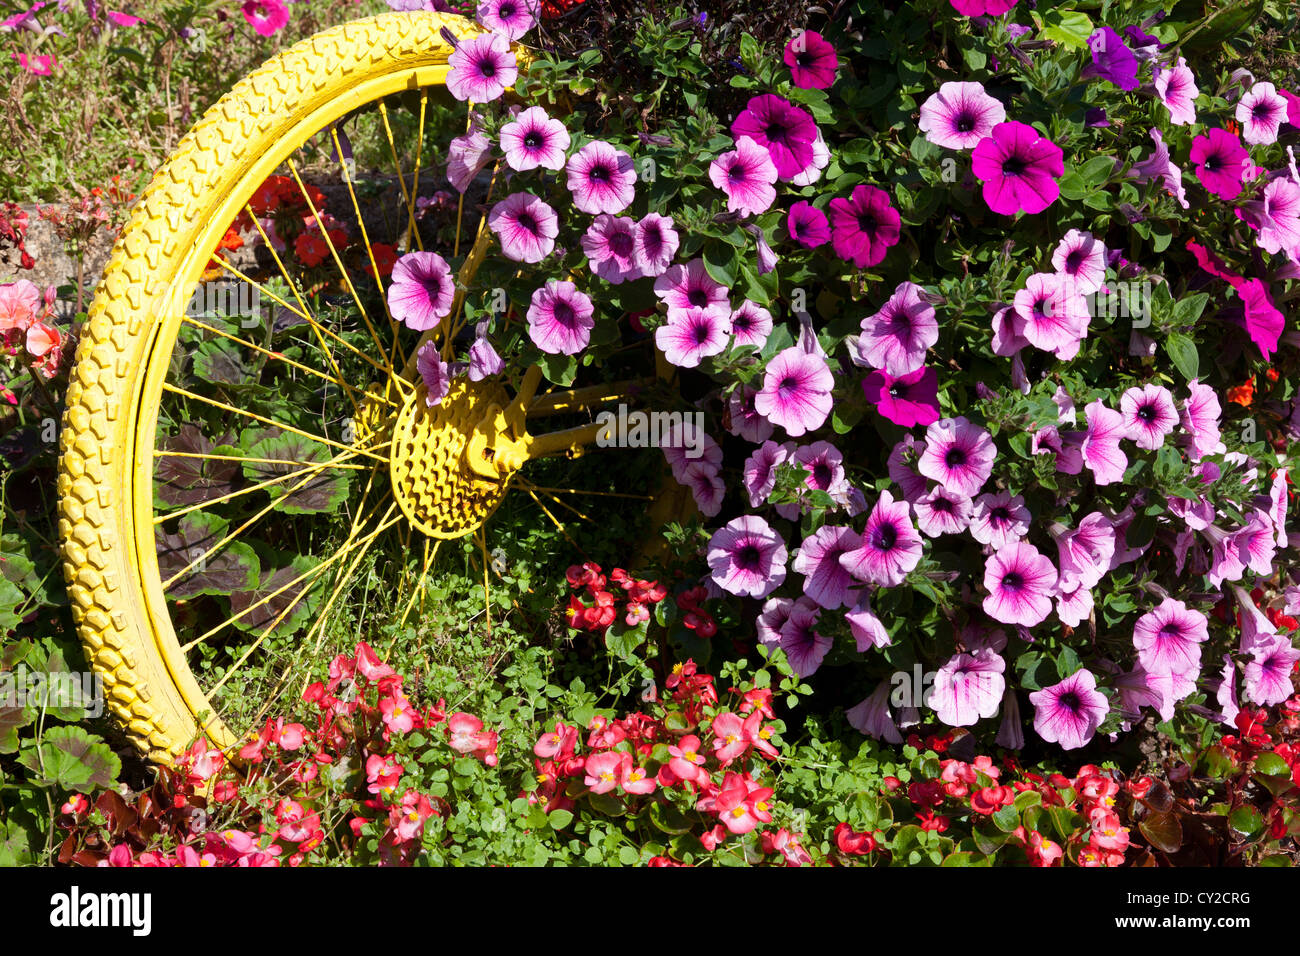 floral-display-including-painted-bicycle